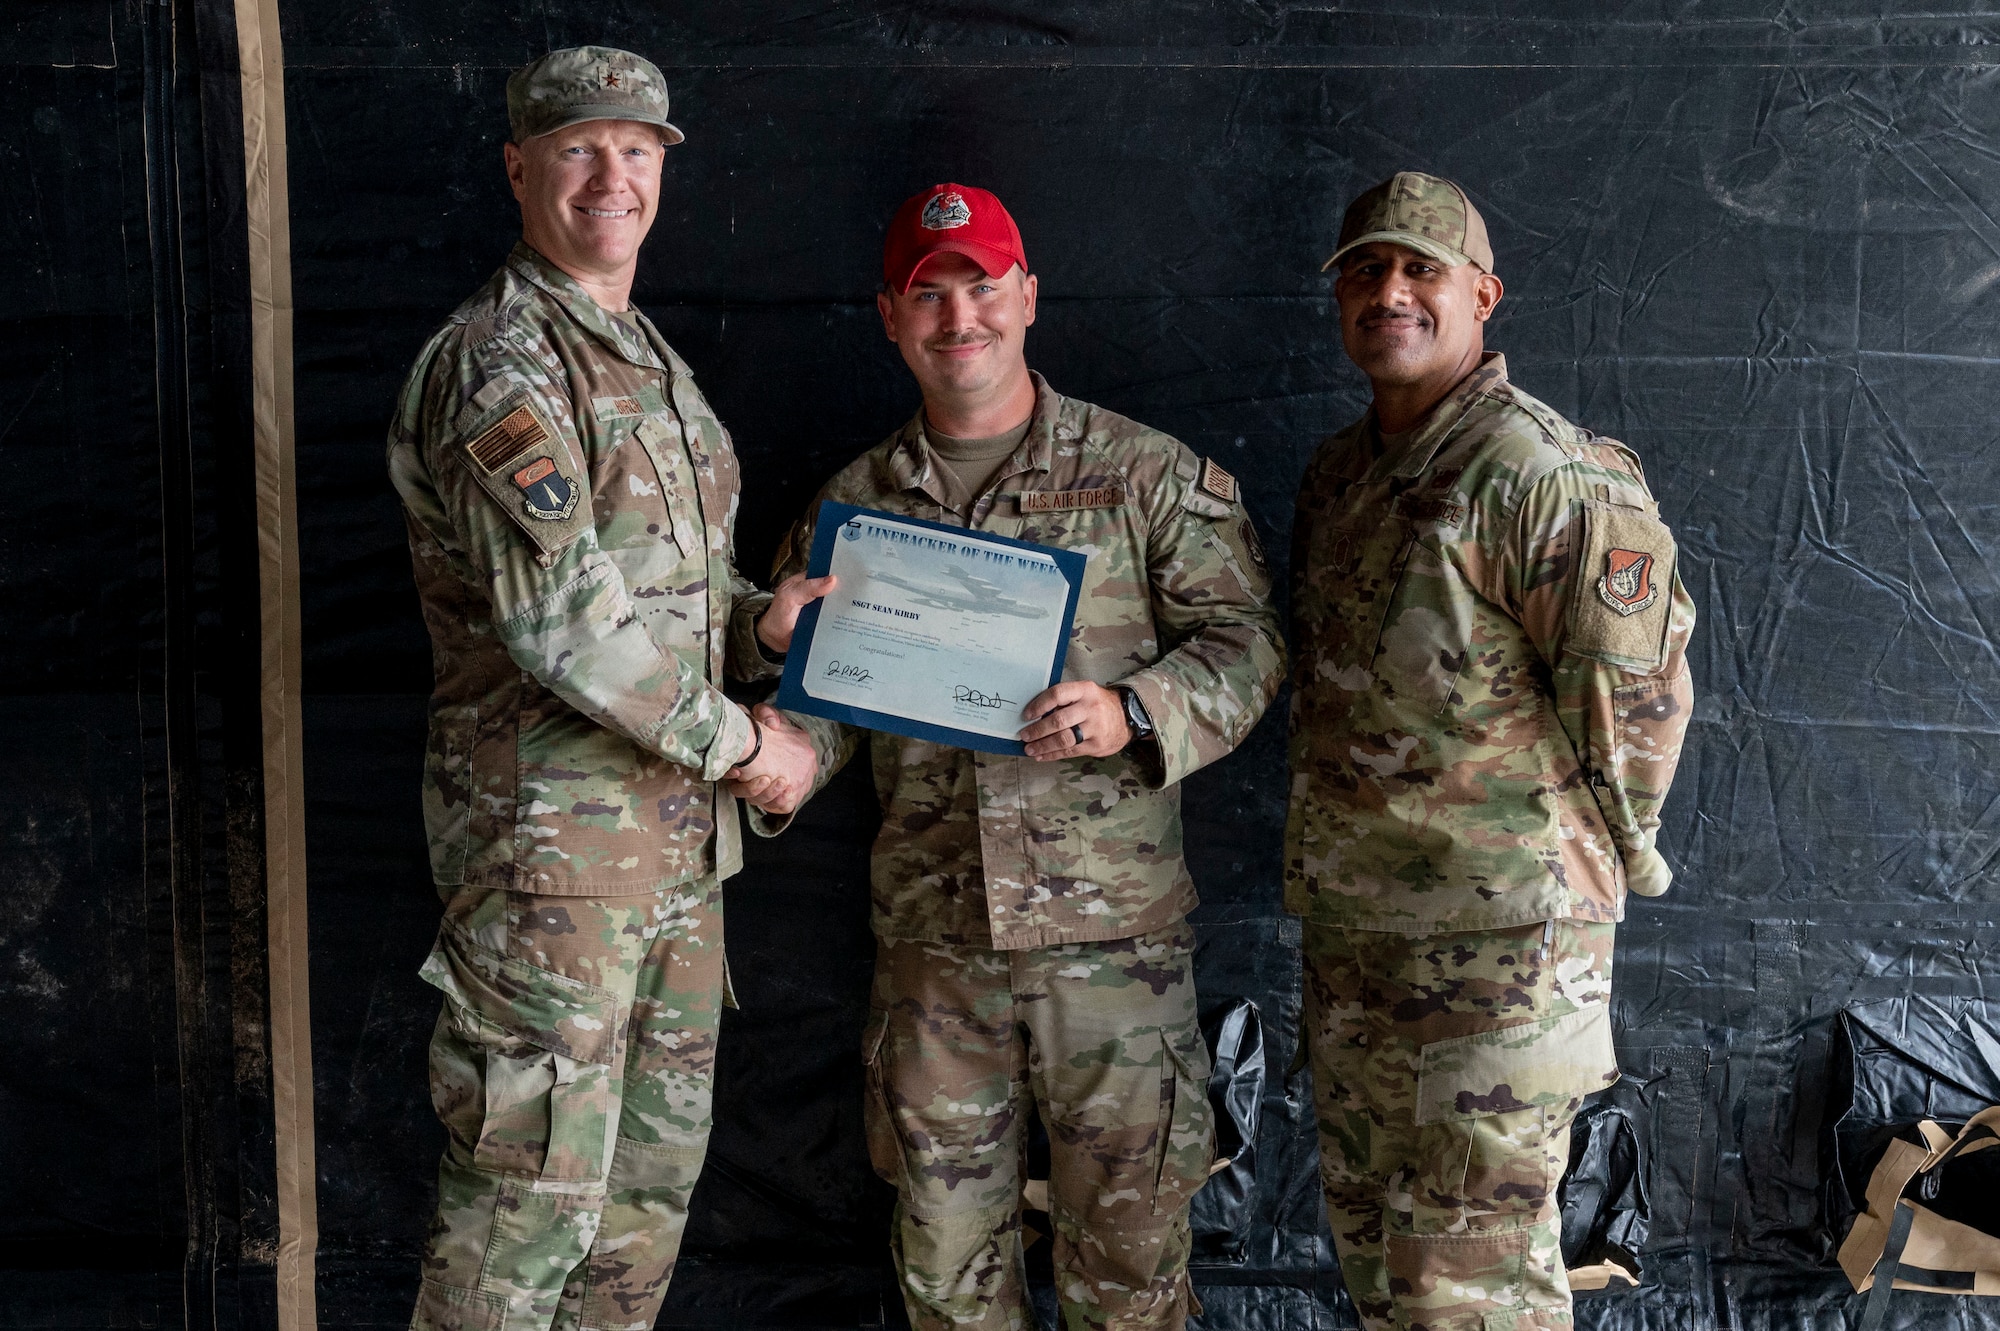 U.S. Air Force Staff Sgt. Sean Kirby, an emergency management contingency skills instructor assigned to the 554th Rapid Engineer Deployable Heavy Operational Repair Squadron Engineers Squadron, receives the Linebacker of the Week Award from U.S. Air Force Brig. Gen Paul Birch, the 36th Wing commander, and Chief Master Sgt. Jose Ramon, the senior enlisted leader of the 36th Maintenance Group, at Andersen Air Force Base, Guam, Nov. 16, 2022. The Team Andersen Linebacker of the Week recognizes outstanding enlisted, officer, civilian and total force personnel who have had an impact on achieving Team Andersen’s mission, vision and priorities. (U.S. Air Force photo by Airman 1st Class Emily Saxton)